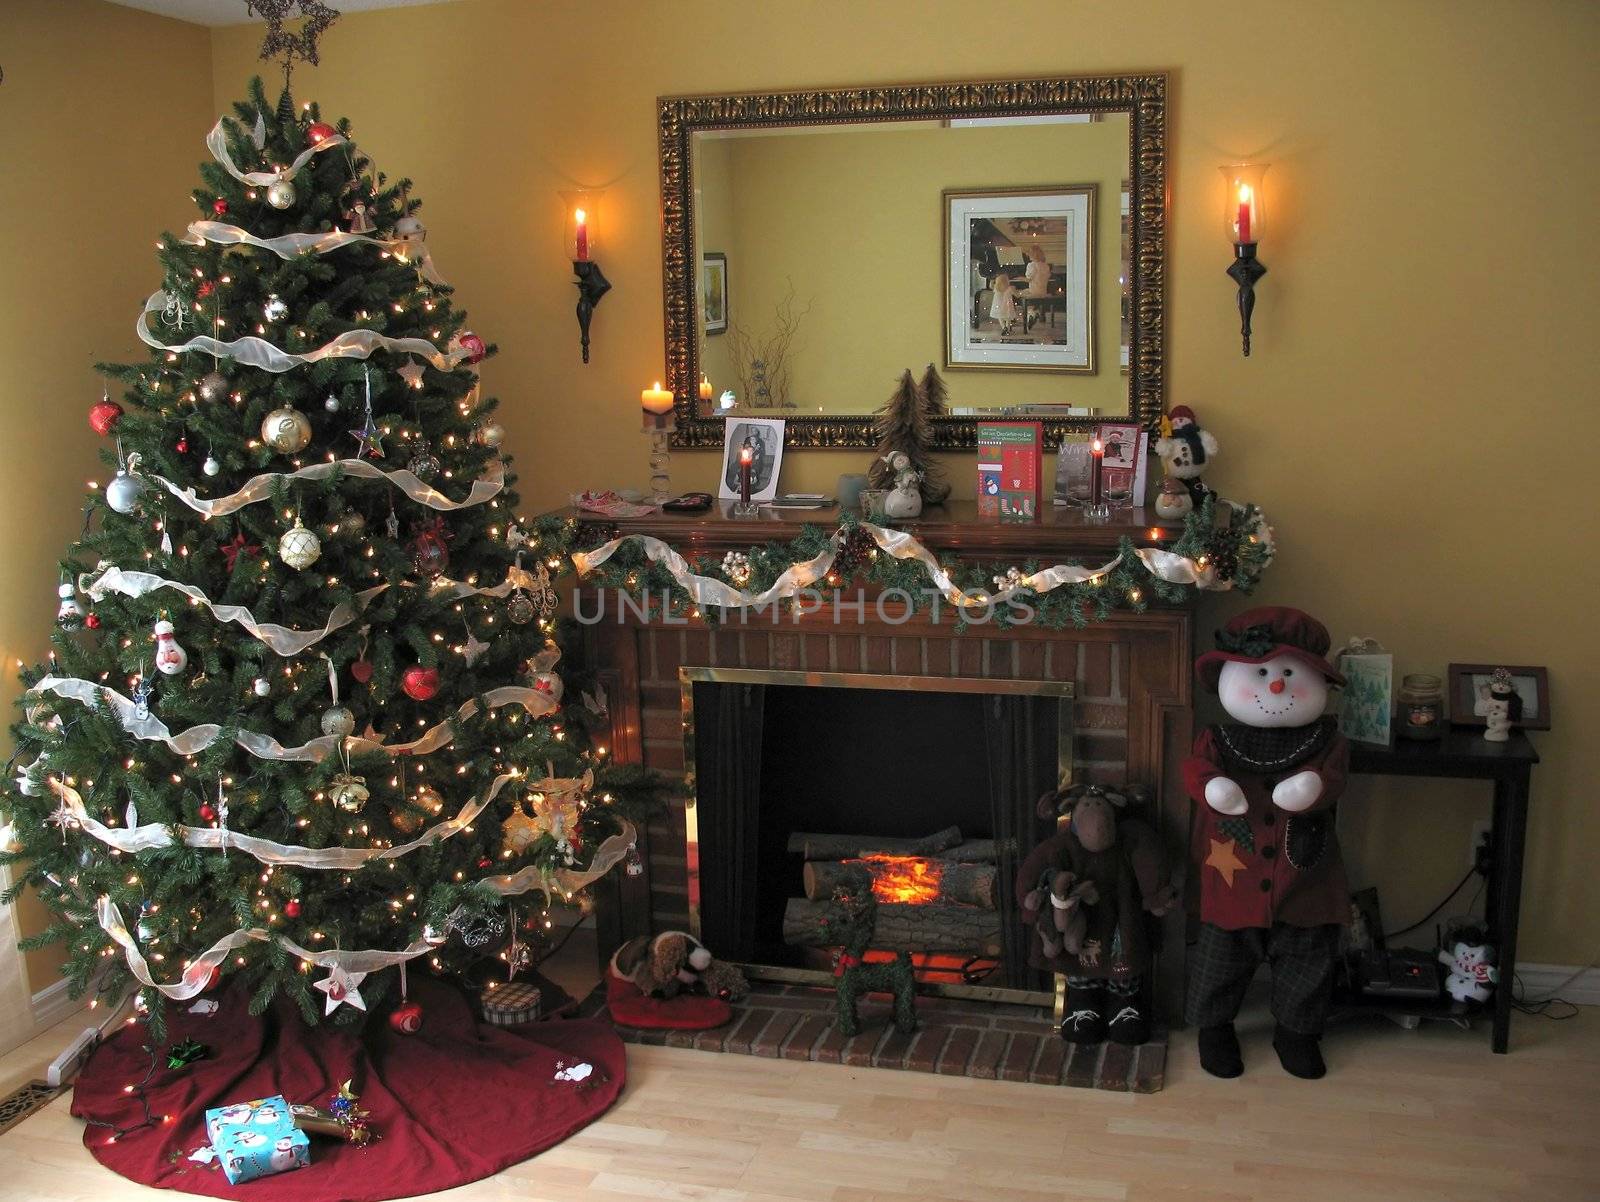 Christmas setting in a living room, with the tree all decorated, fireplace glowing, candles lit, presents around the base of the tree.